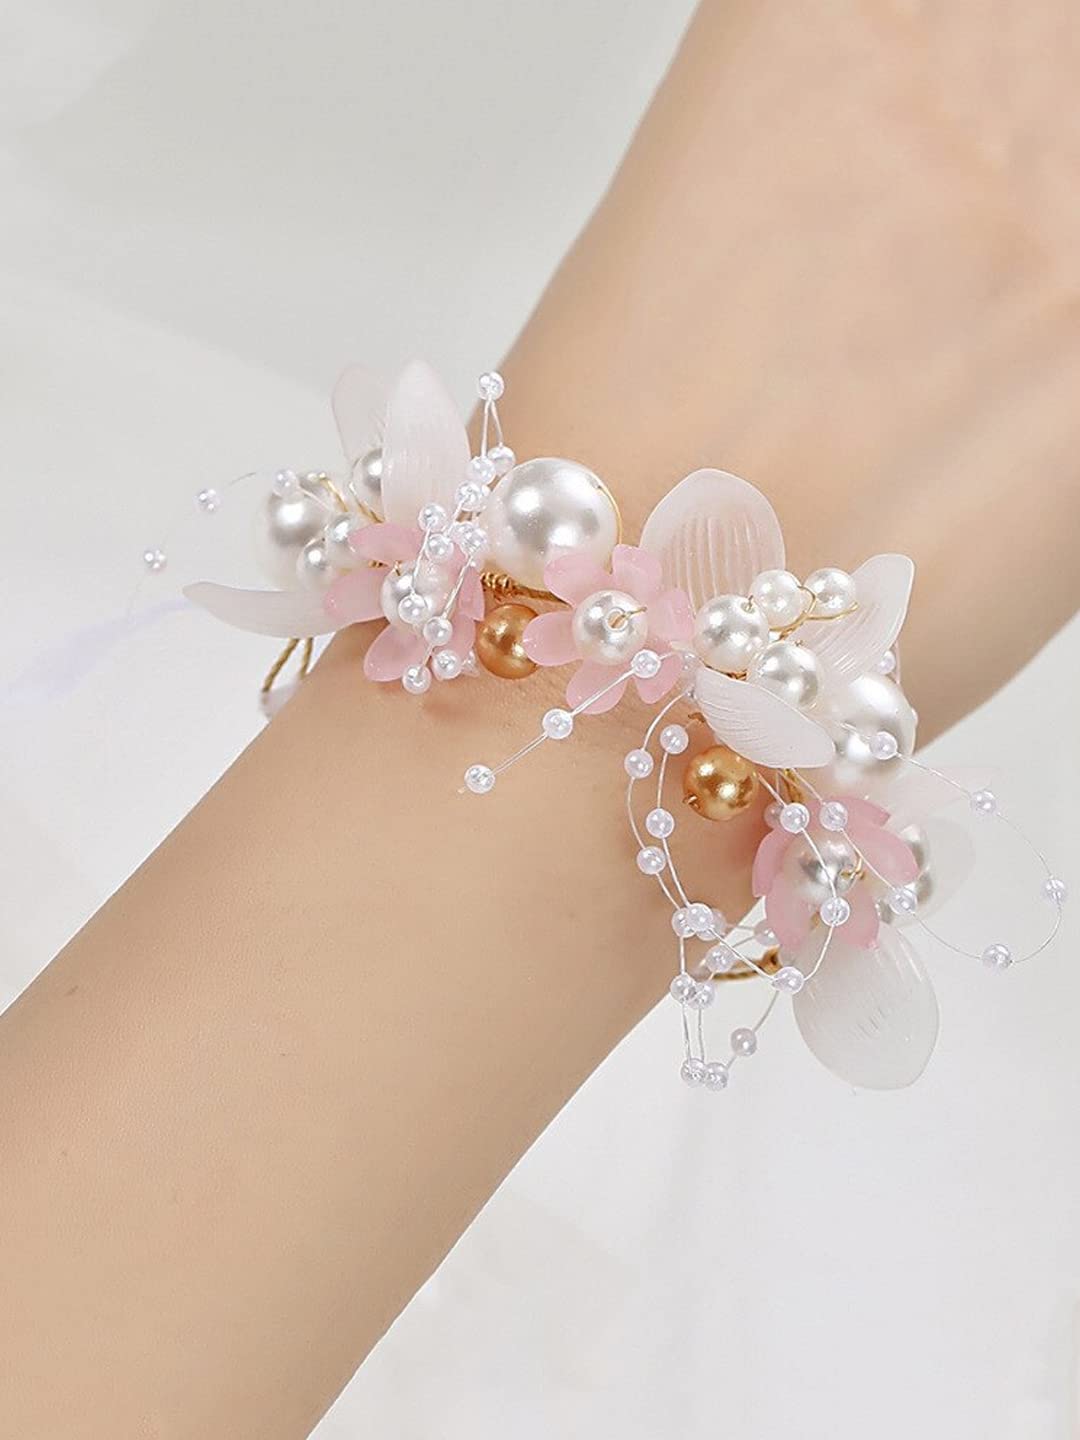 Beautiful couple bracelet connect when you hold hands